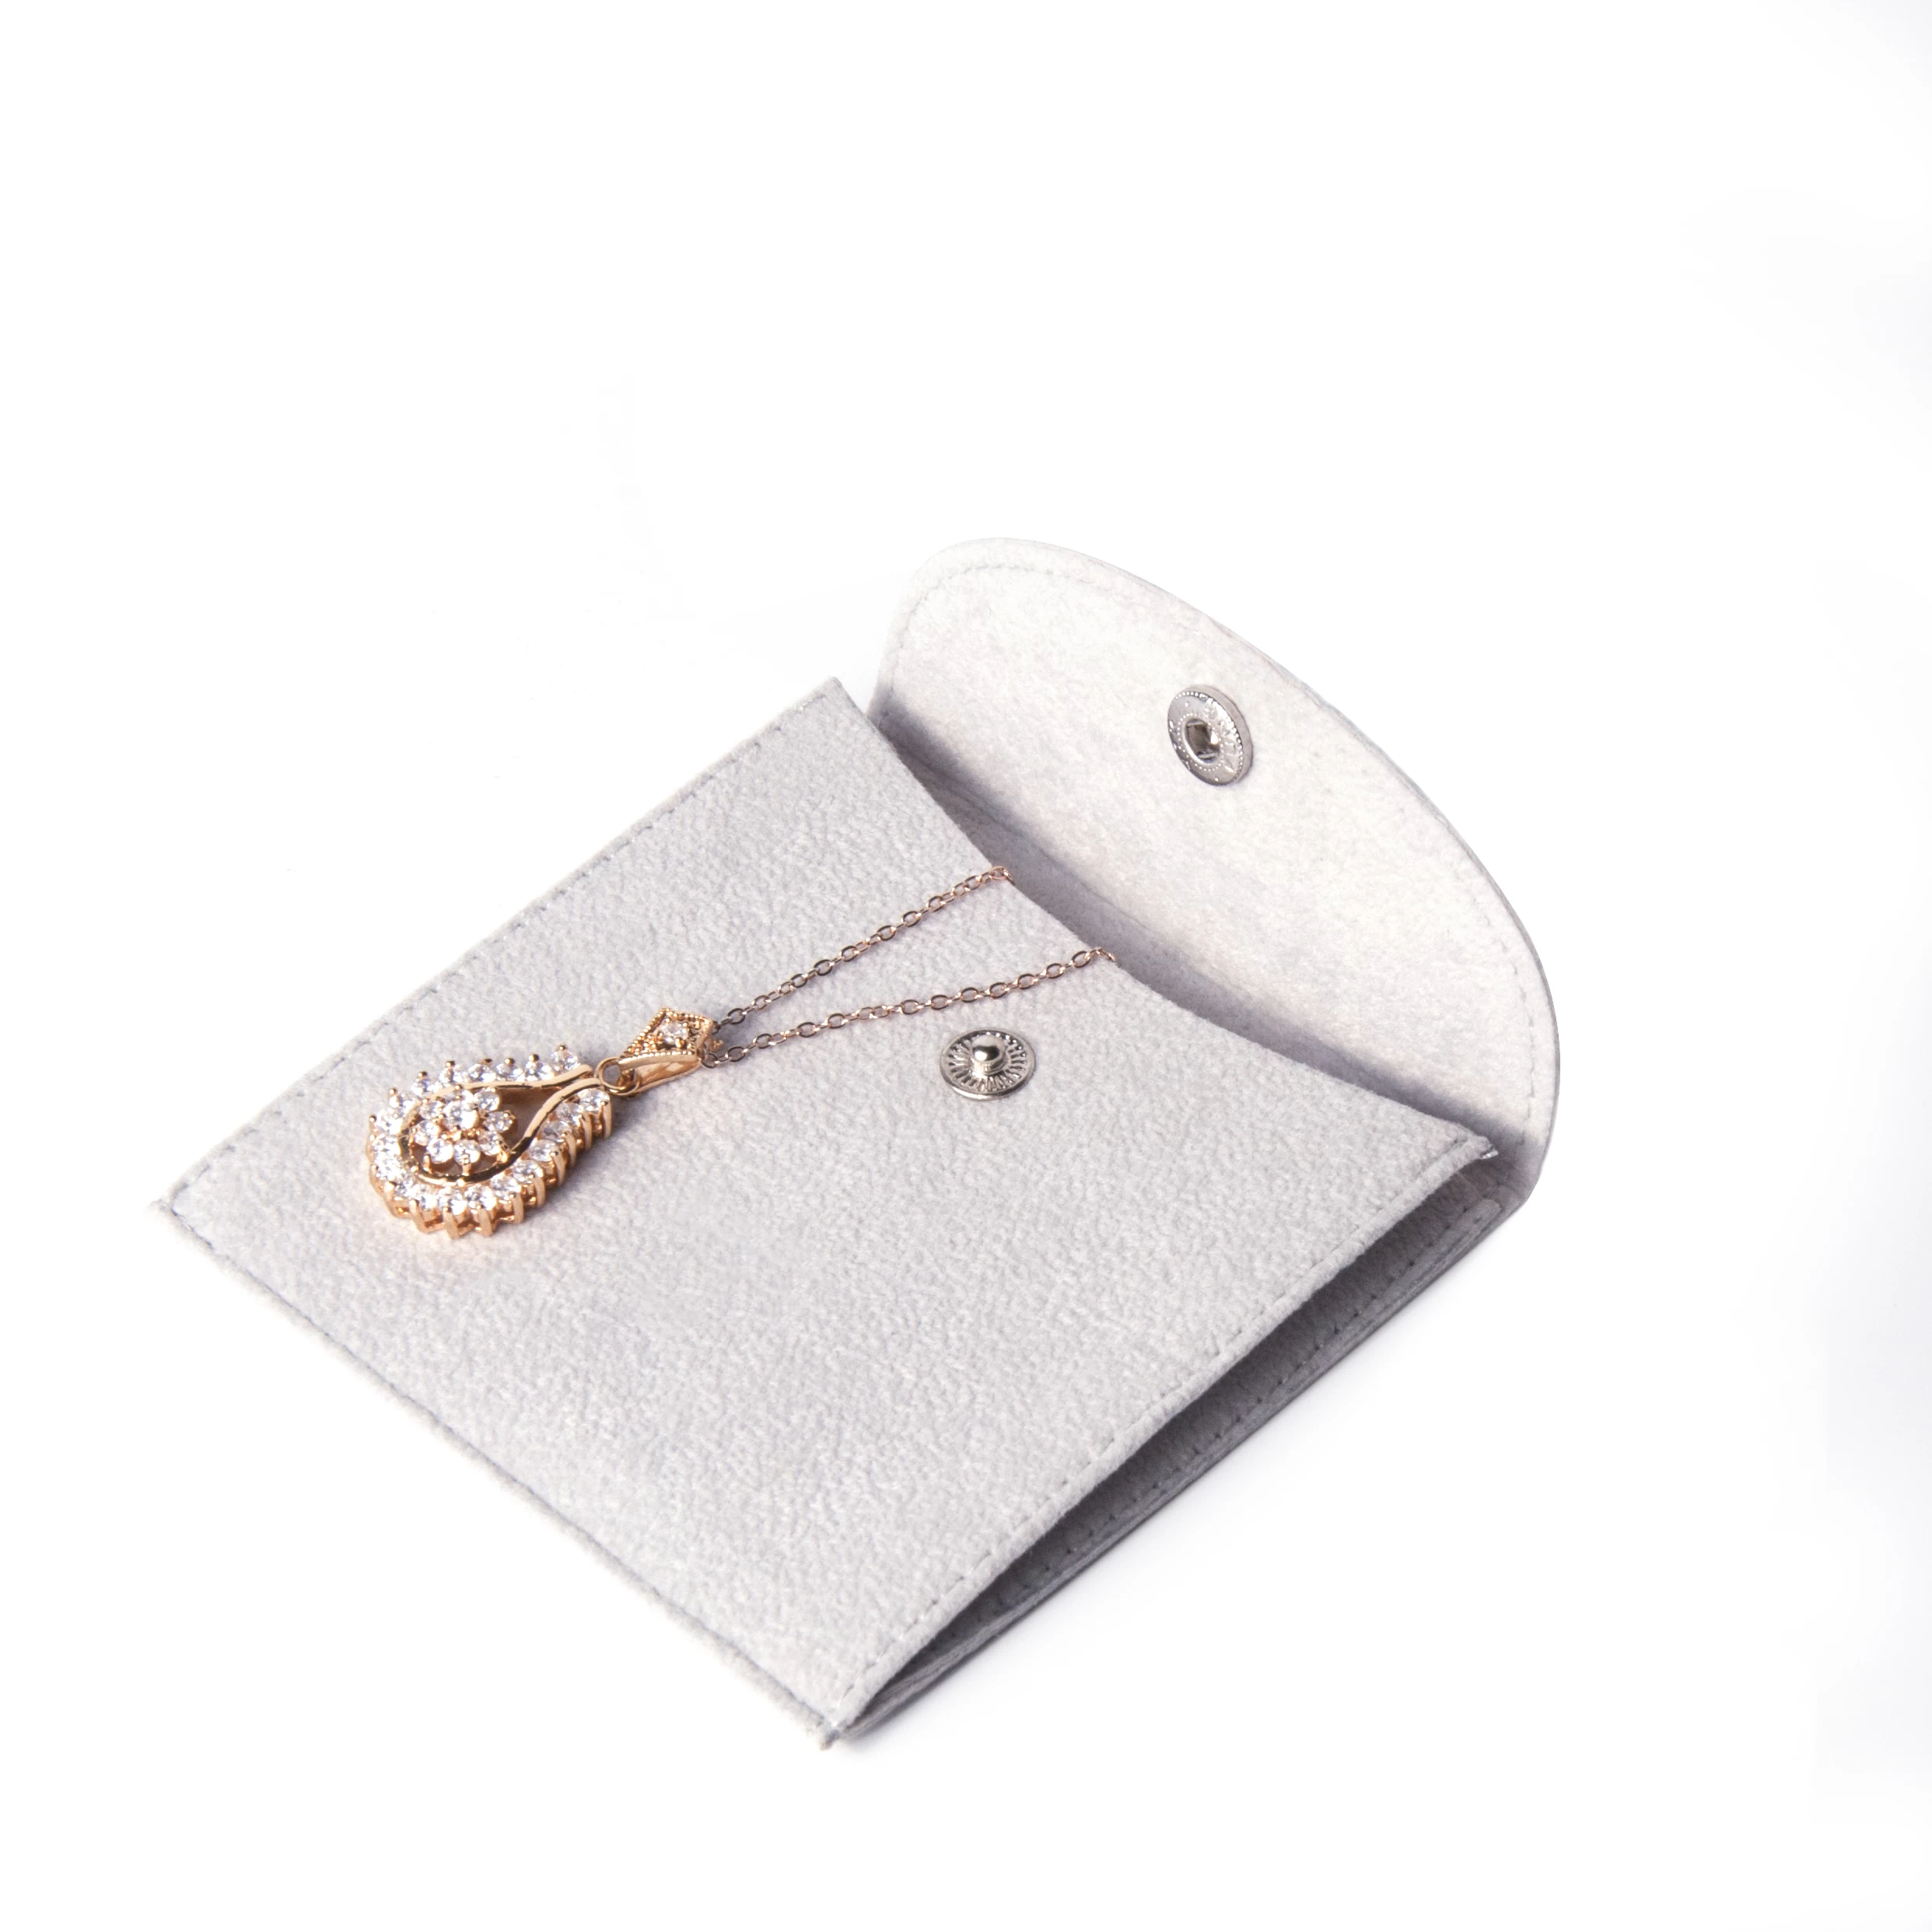 Yaodao wholesale gift earring necklace packaging cards display with logo insert divider custom suede velvet jewelry pouch